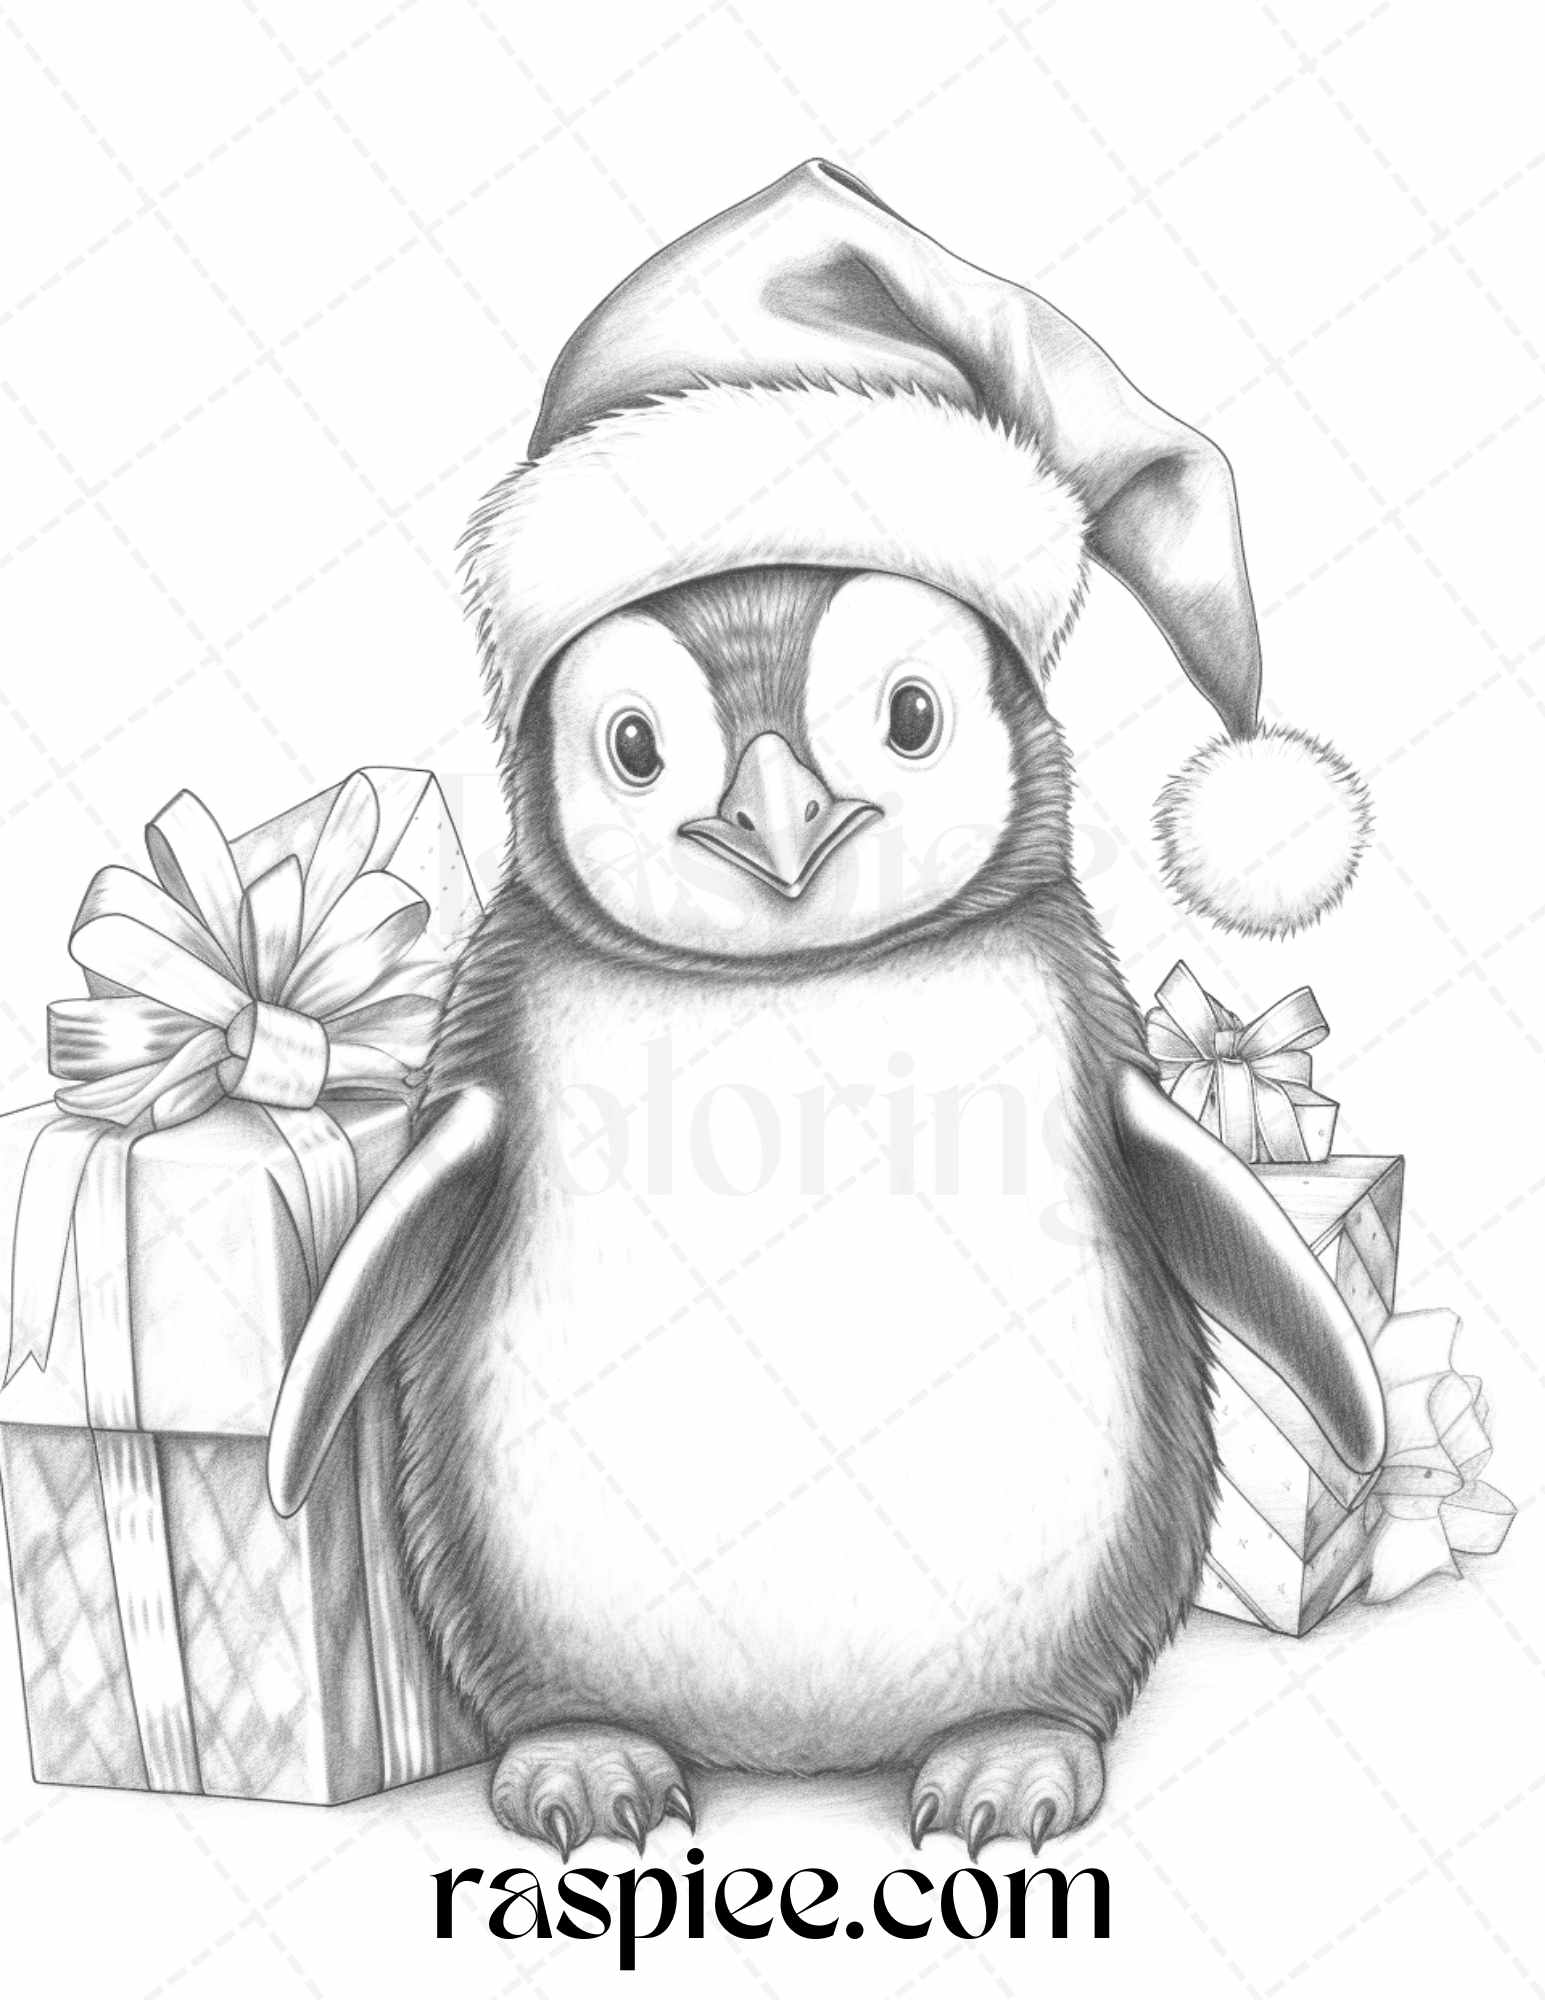 70 Christmas Animals Grayscale Coloring Pages Printable for Adults, PDF File Instant Download - Raspiee Coloring